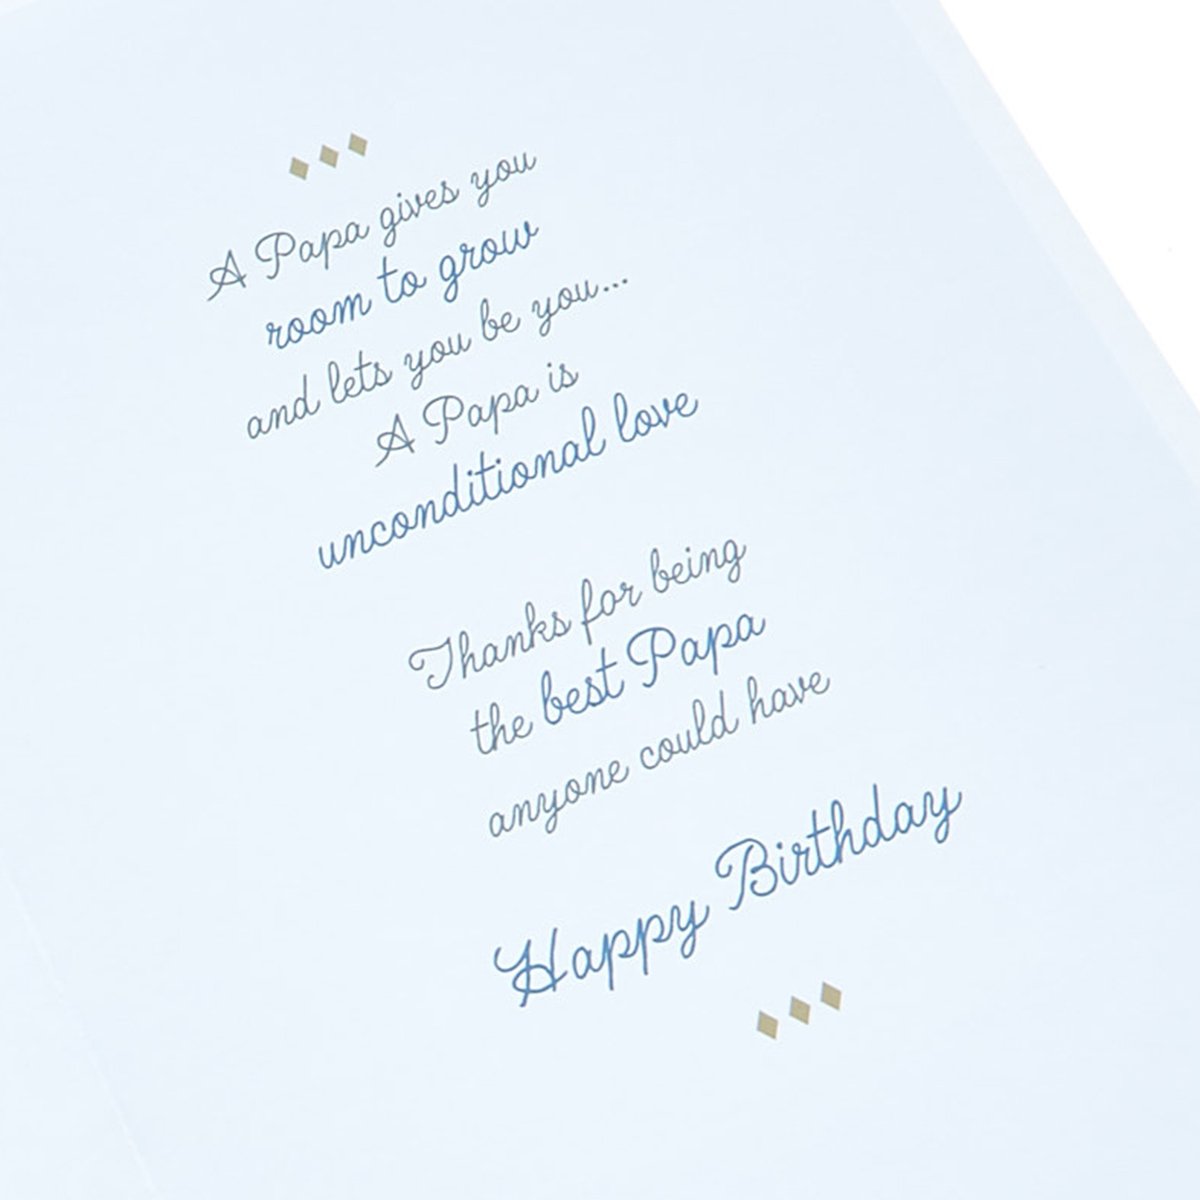 Birthday Card - What Is A Papa